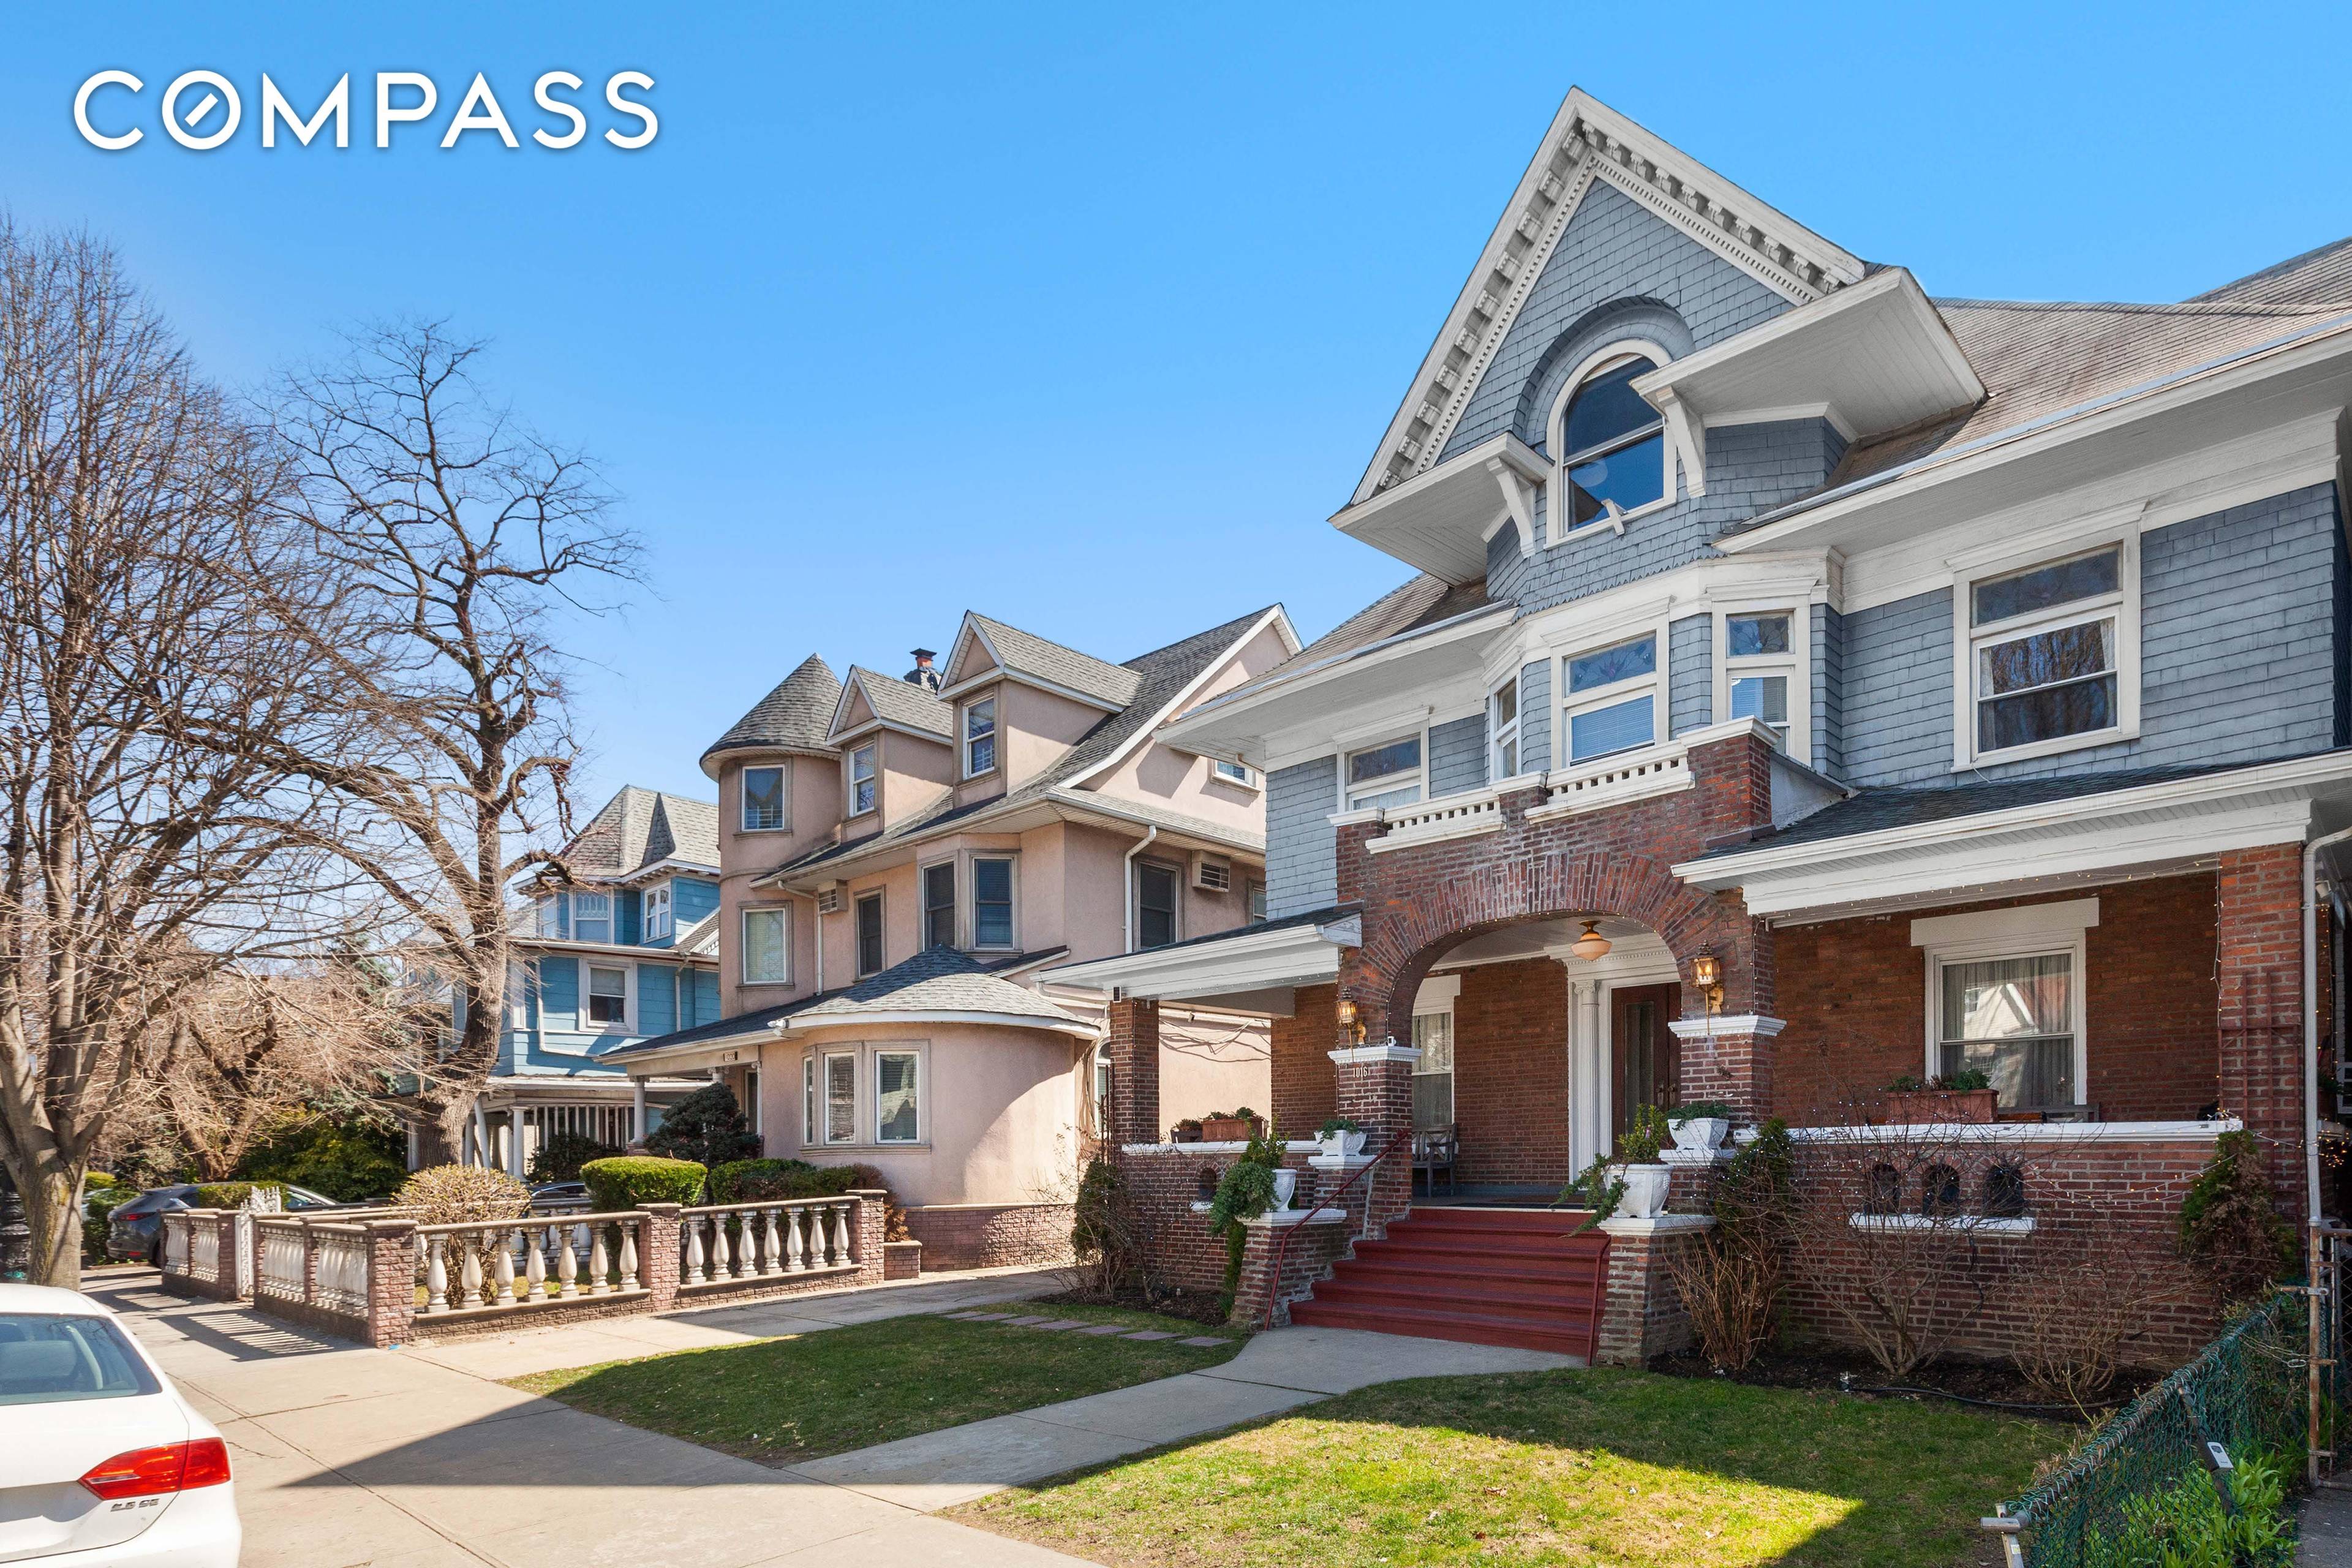 Extraordinary, expansive and exquisite describes this palatial Victorian home.